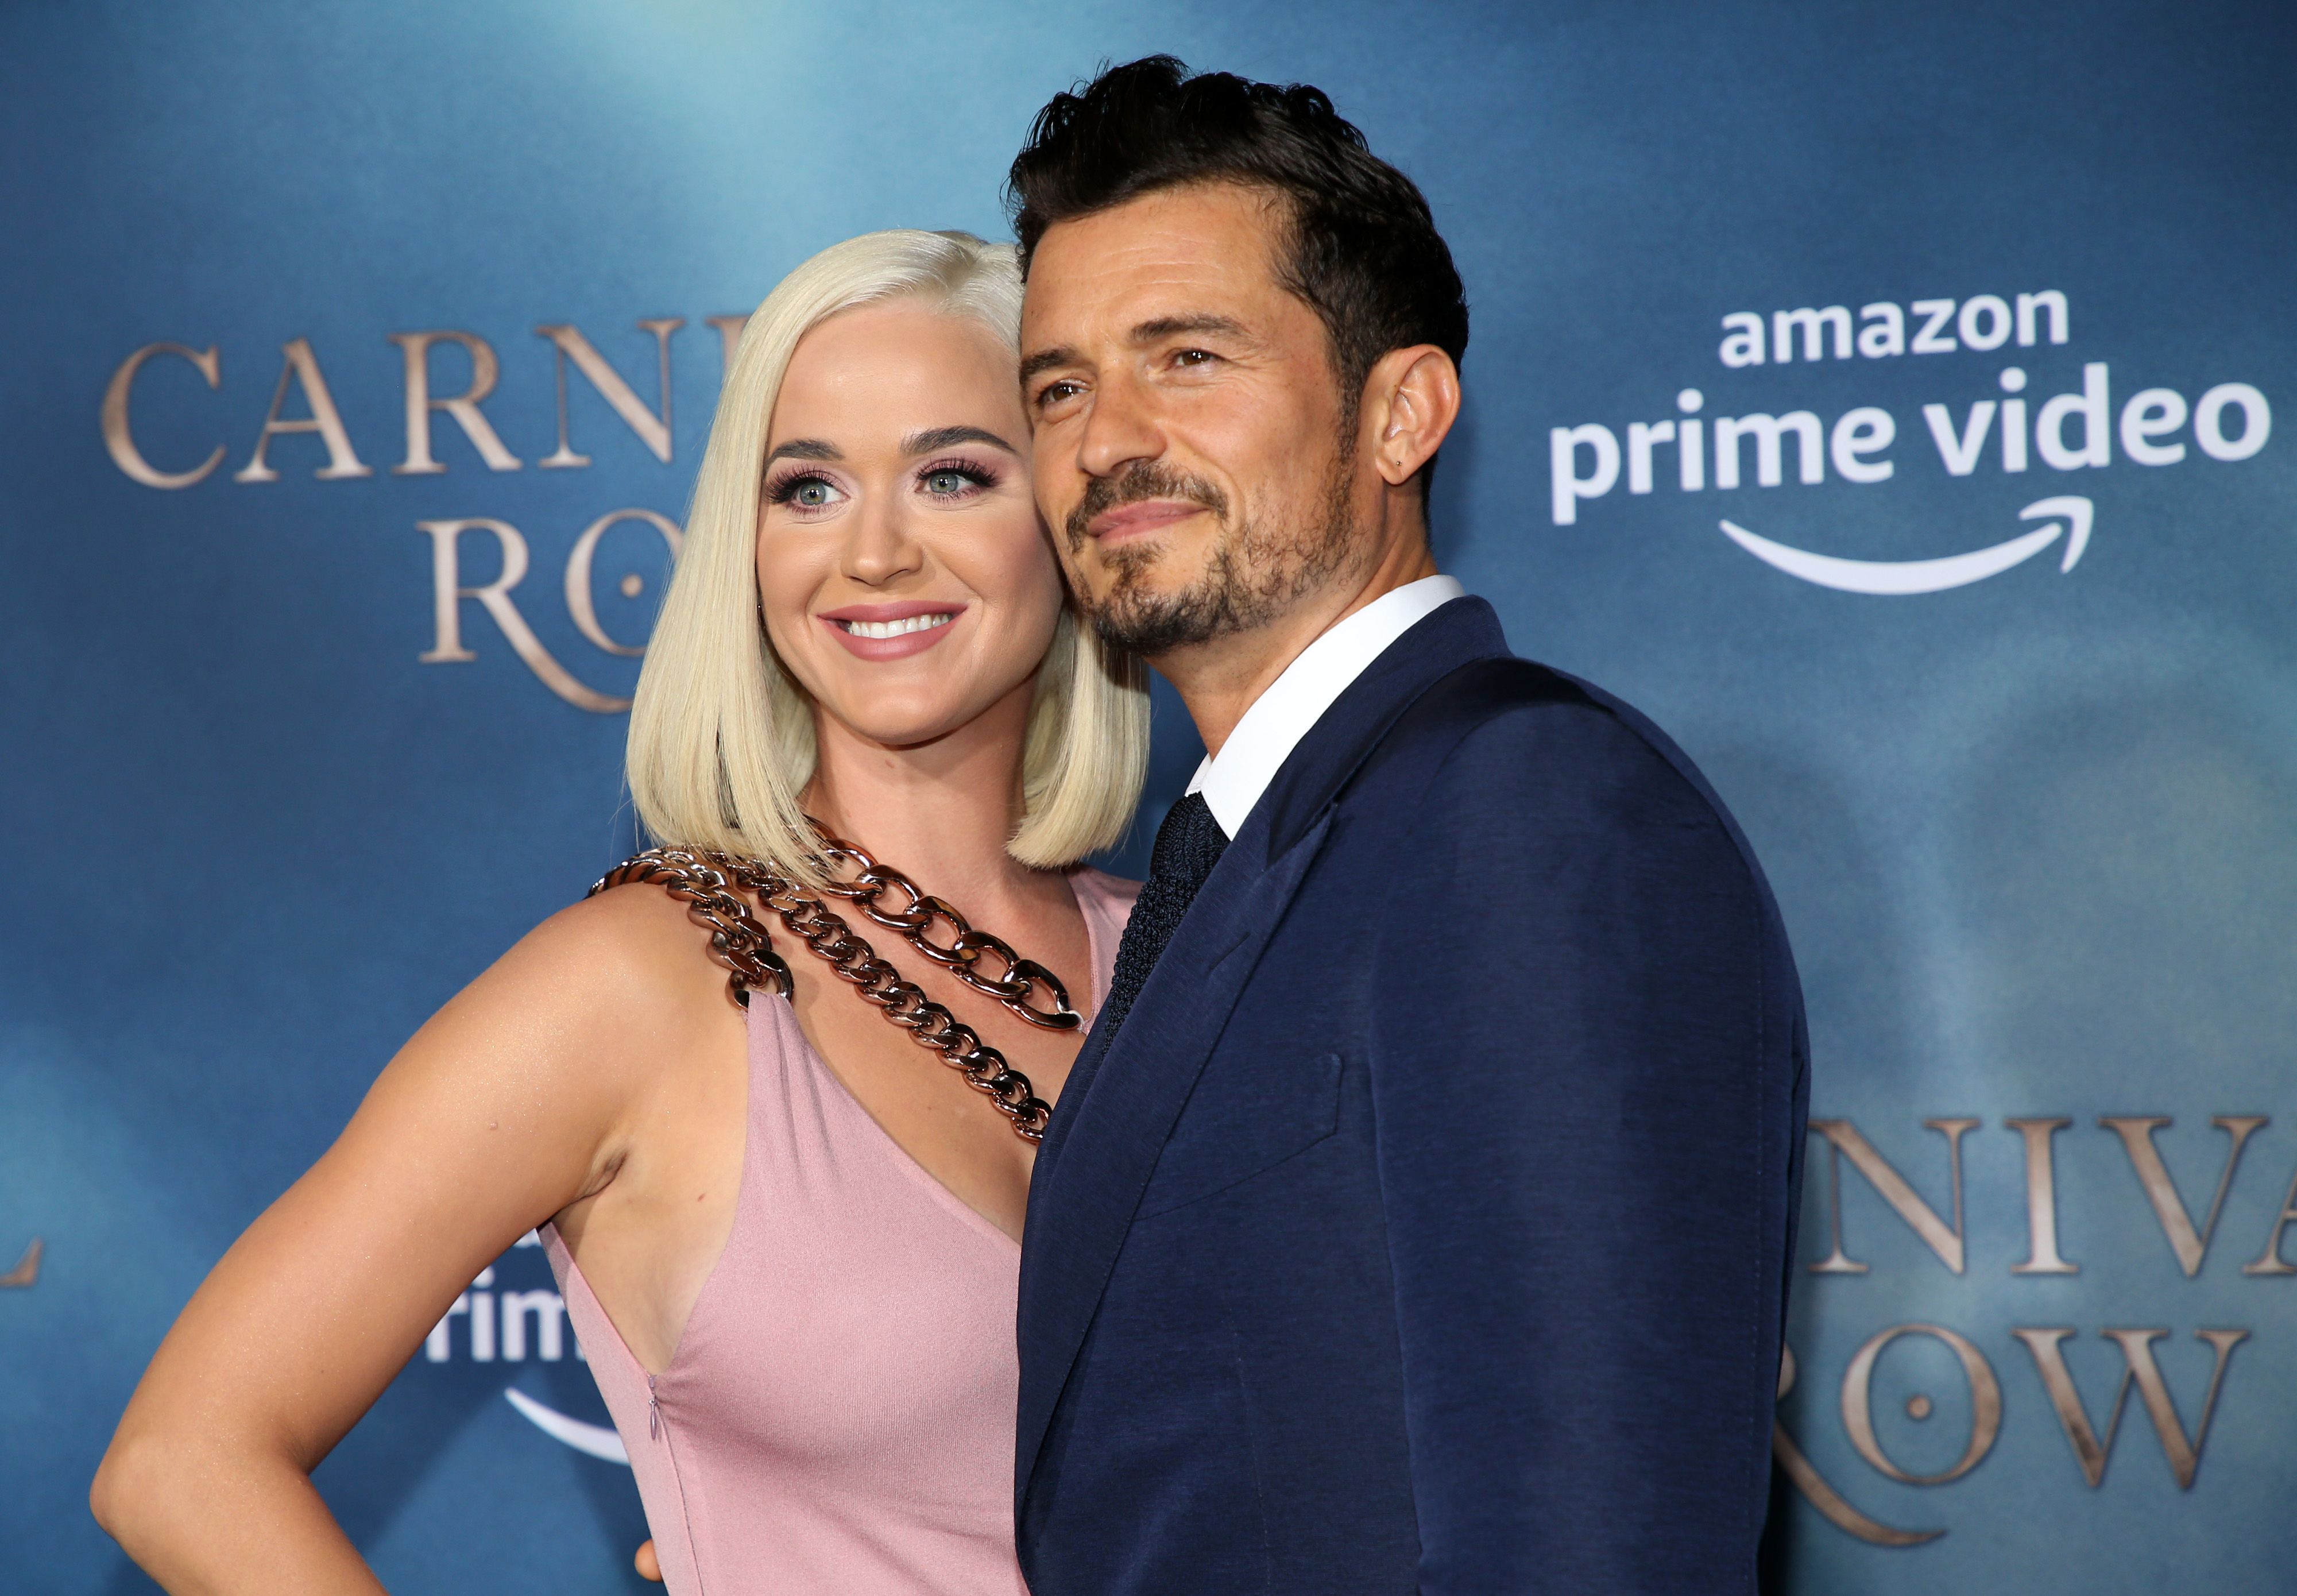 Katy Perry and Orlando Bloom at the LA premiere of Amazon's "Carnival Row" at TCL Chinese Theatre on August 21, 2019 | Photo: Getty Images